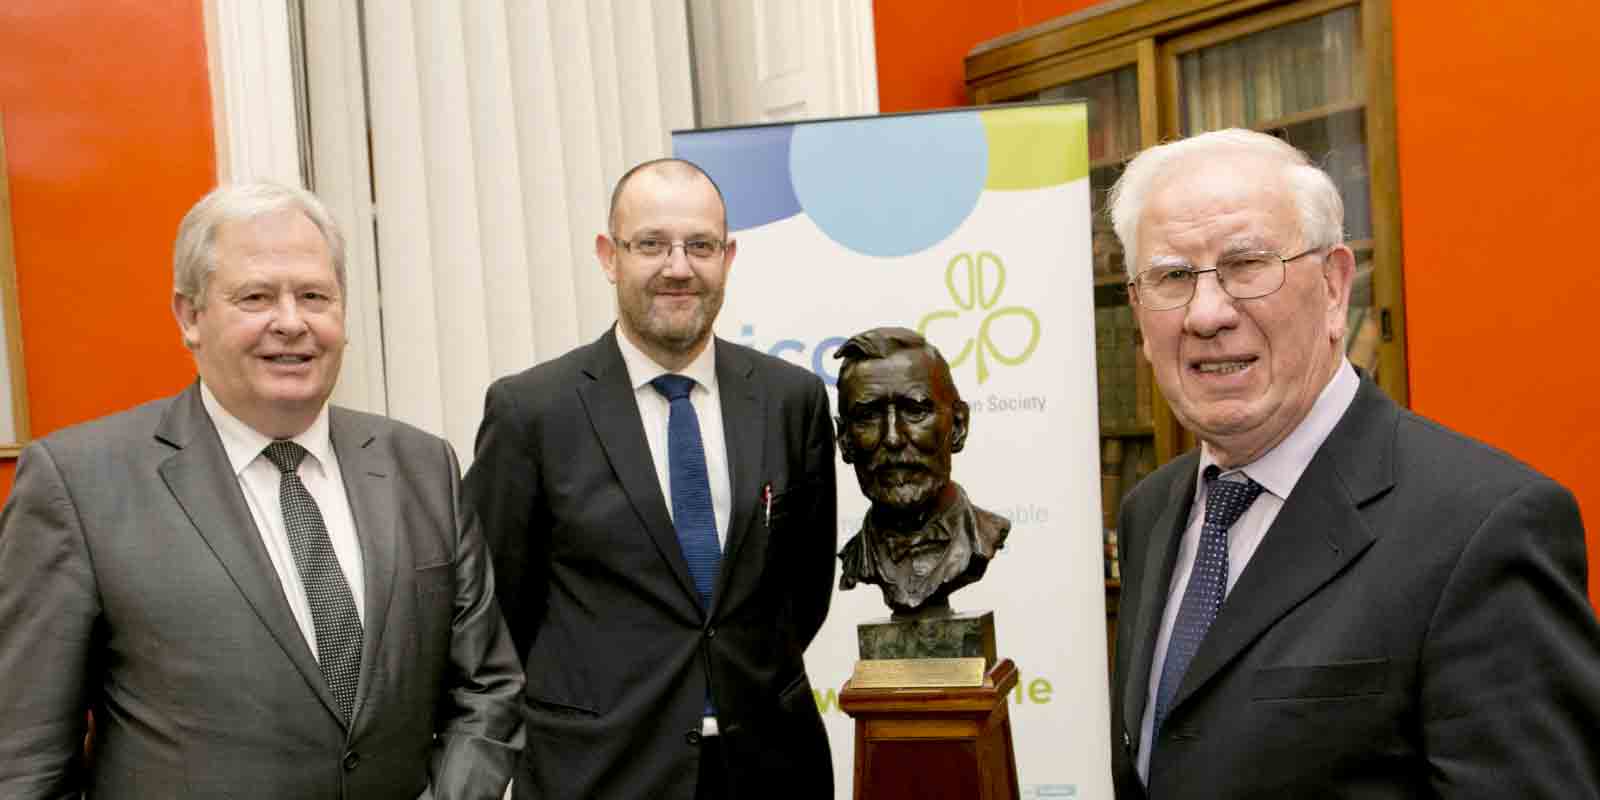 PLUNKETT AWARD - The outstanding contribution to the Irish co-operative movement by the former CEO of the Irish Farm Accounts Co-operative Society (IFAC), Peadar Murphy, has been recognised nationally by the industry’s highest honour - The Plunkett Award for Co-operative Endeavour. Pictured (left to right): Martin Keane, President and T.J. Flanagan, CEO of the Irish Co-operative Organisation Society (ICOS), with The Plunkett Award recipient Peadar Murphy.